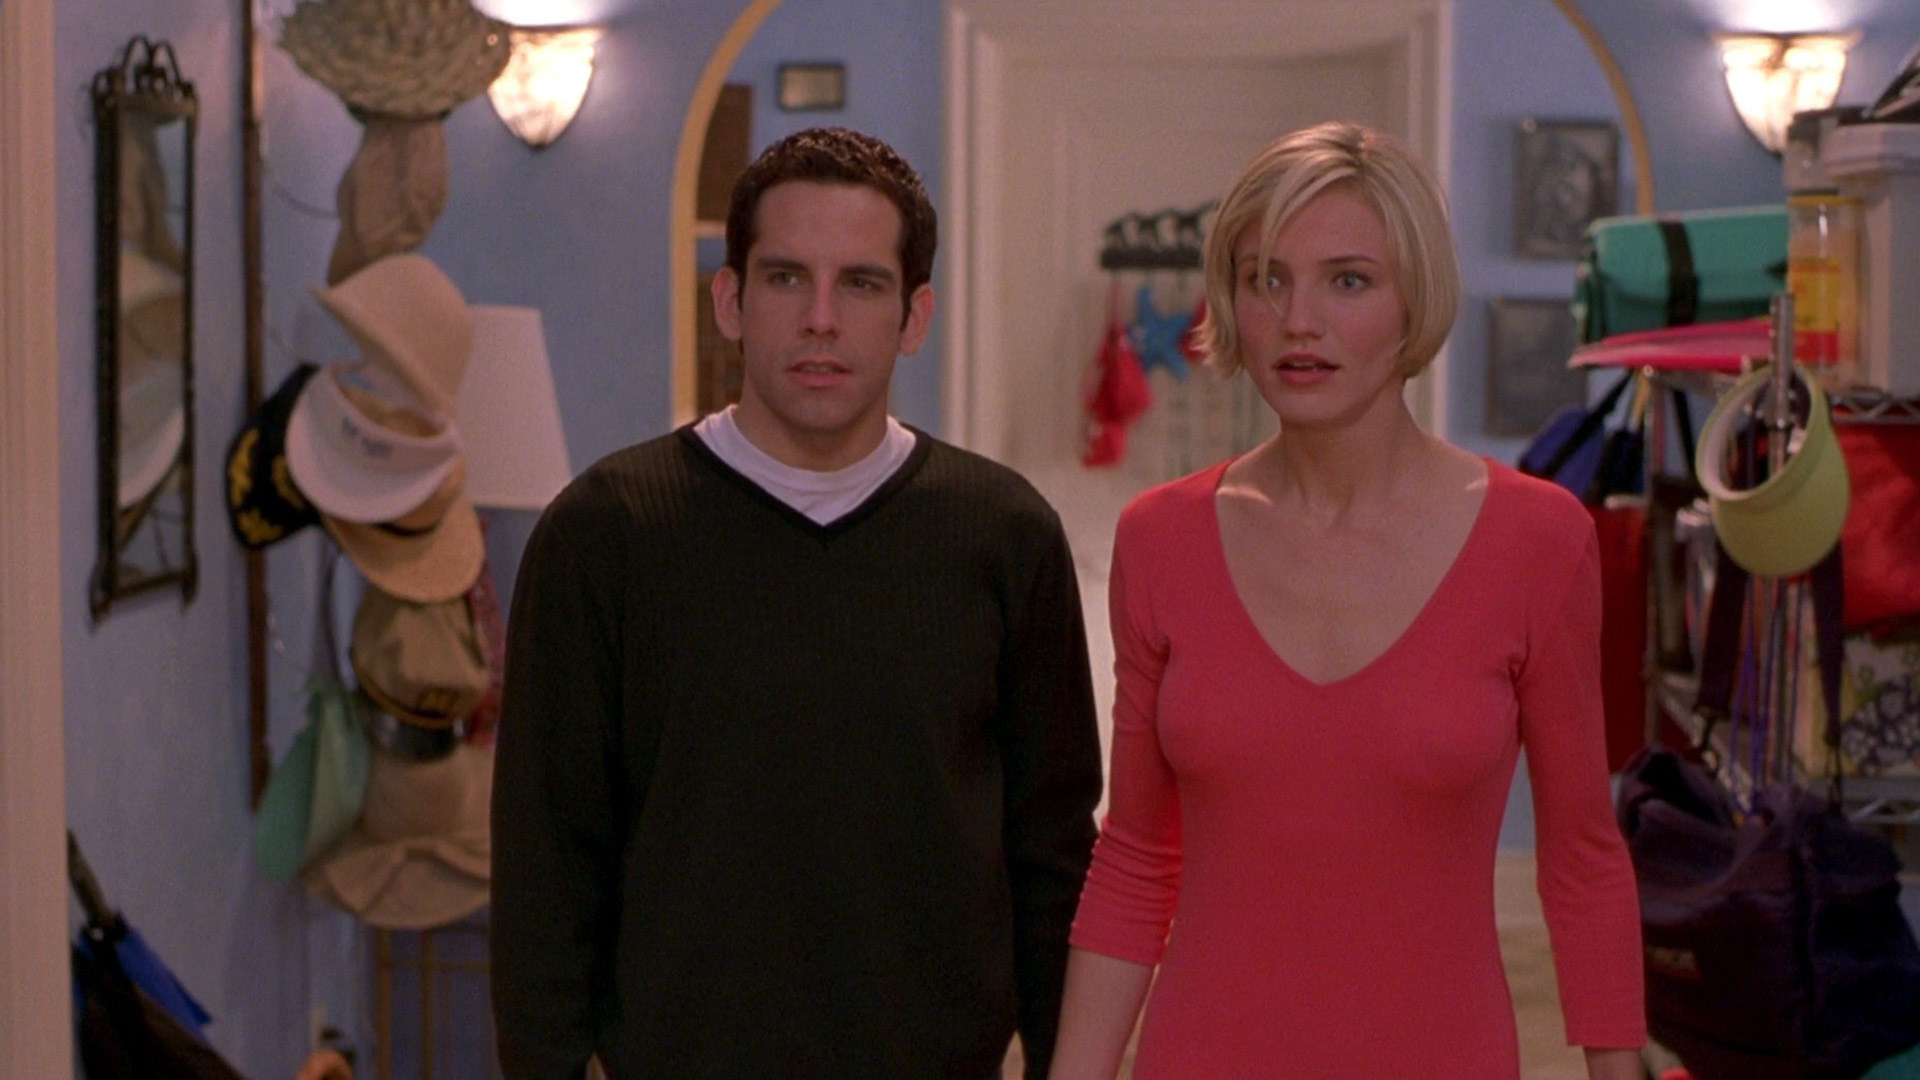 mary looks in shock as ted stands next to her